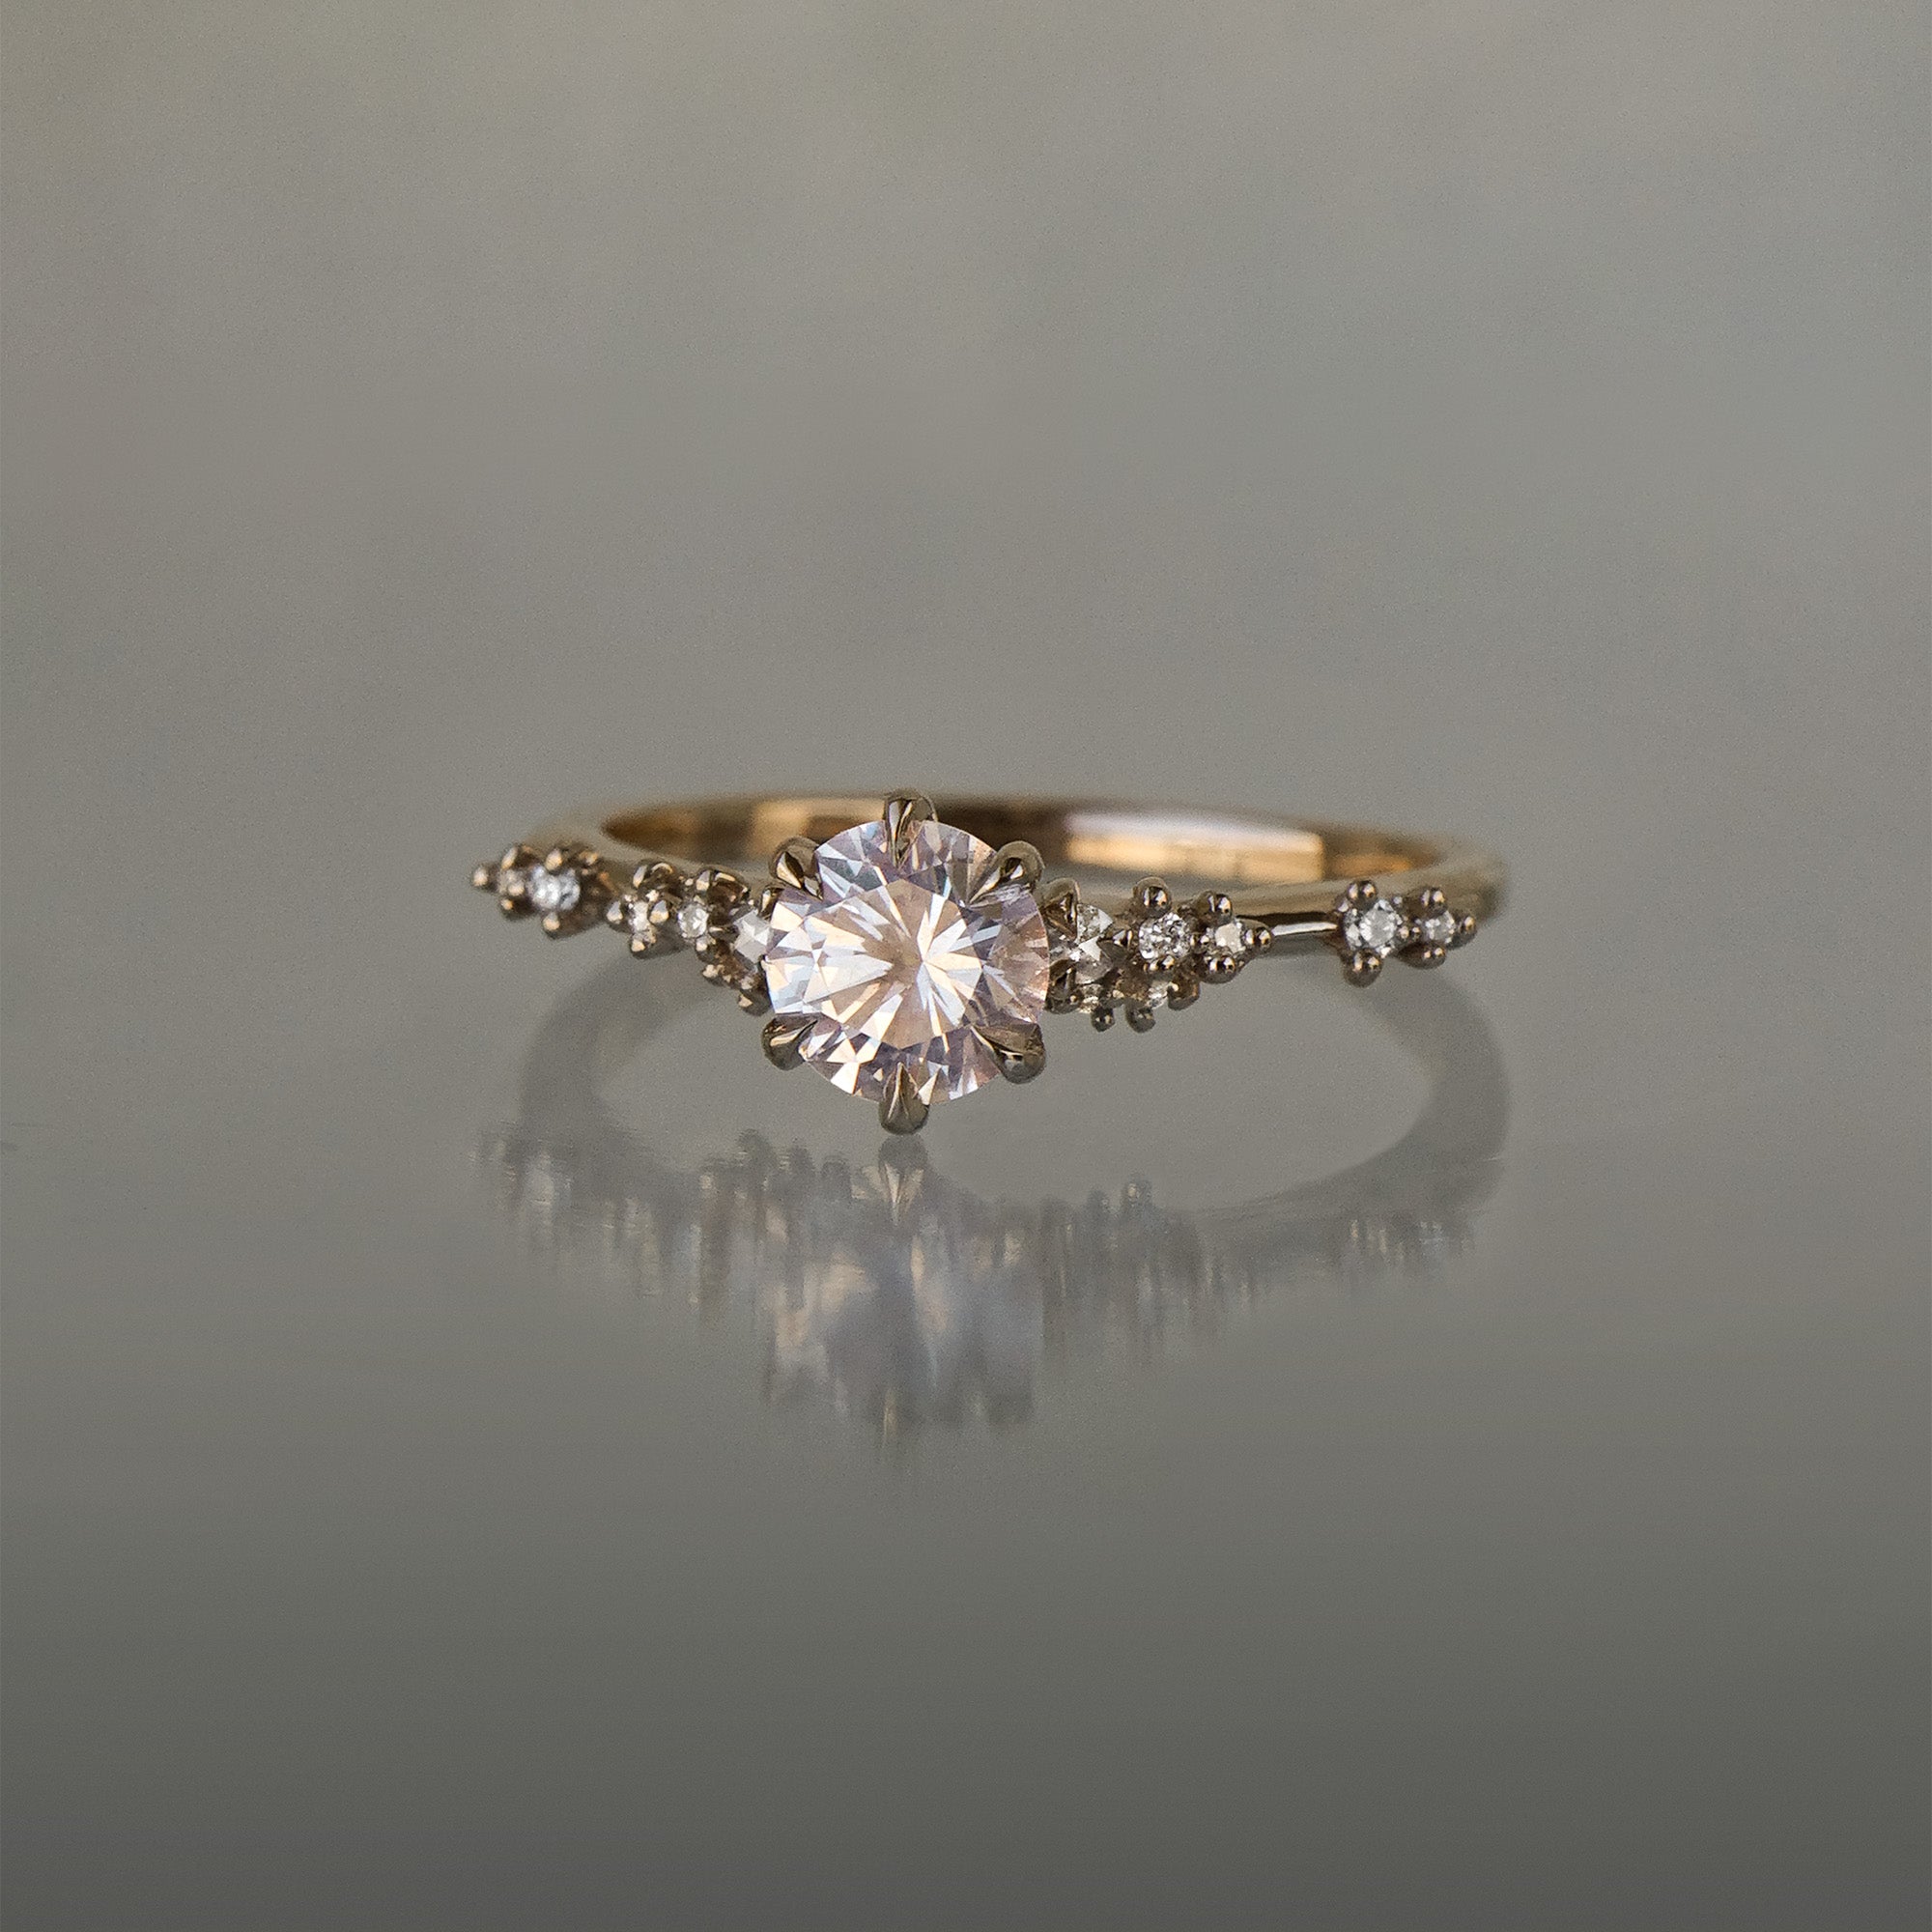 A one of a kind "Daphne" style engagement ring by Laurie Fleming Jewellery featuring a pale rosewater pink sapphire centre. The band is encrusted in sparkling diamond clusters. The ring is handcarved and made in solid champagne yellow gold, and is situated on a medium grey background.